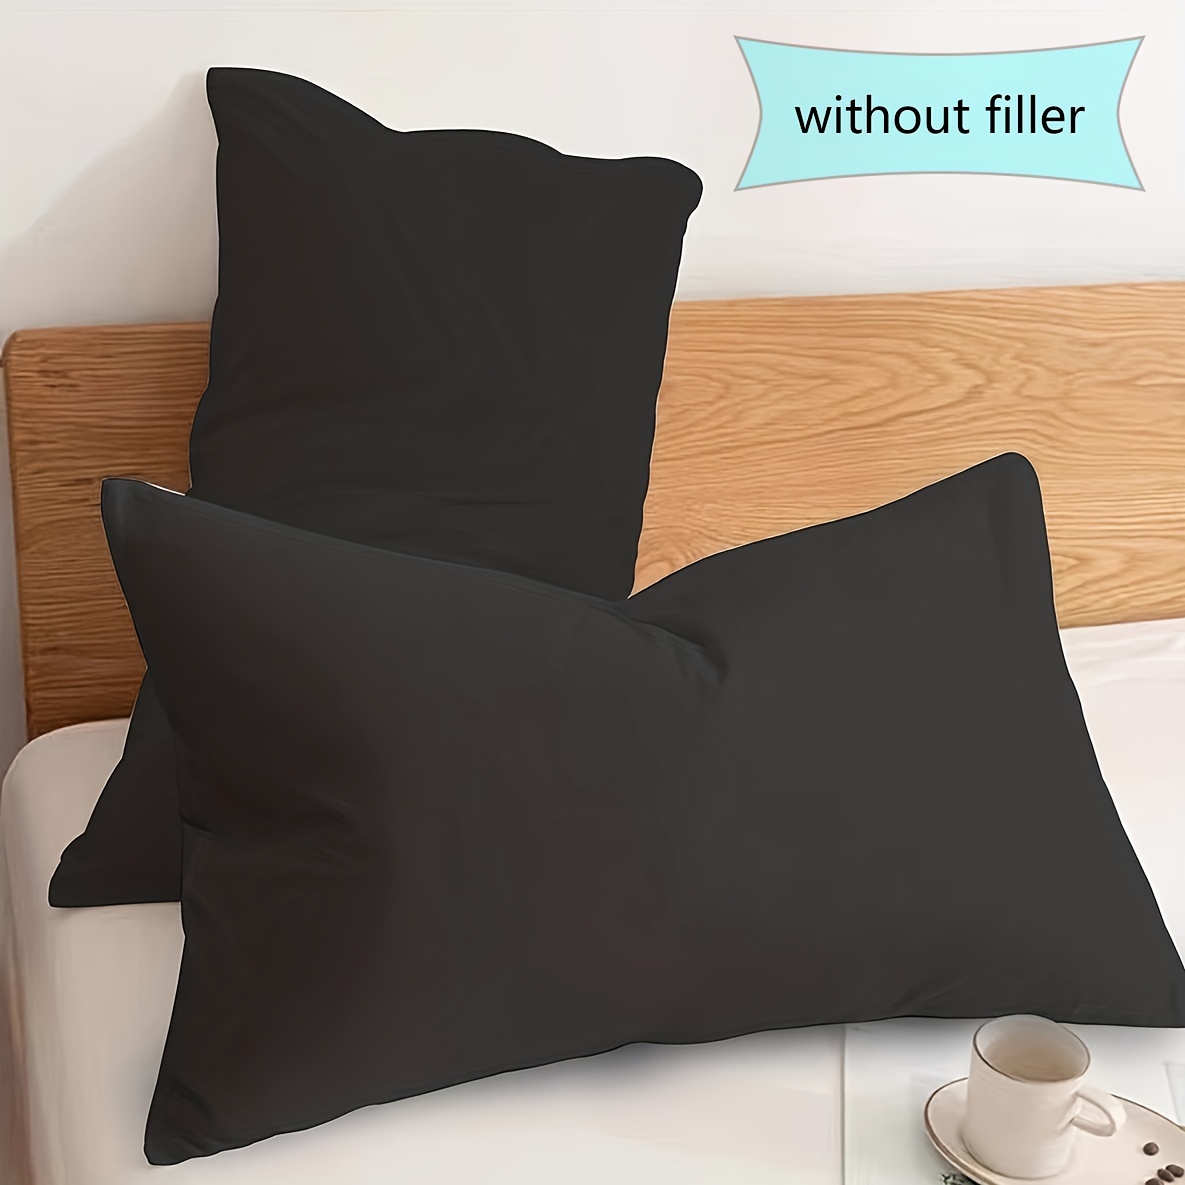 

2pcs Black Solid Color 90g Brushed Pillowcases, Without Filling, Modern Fabric Pillowcases, Suitable For Home Use, All Seasons